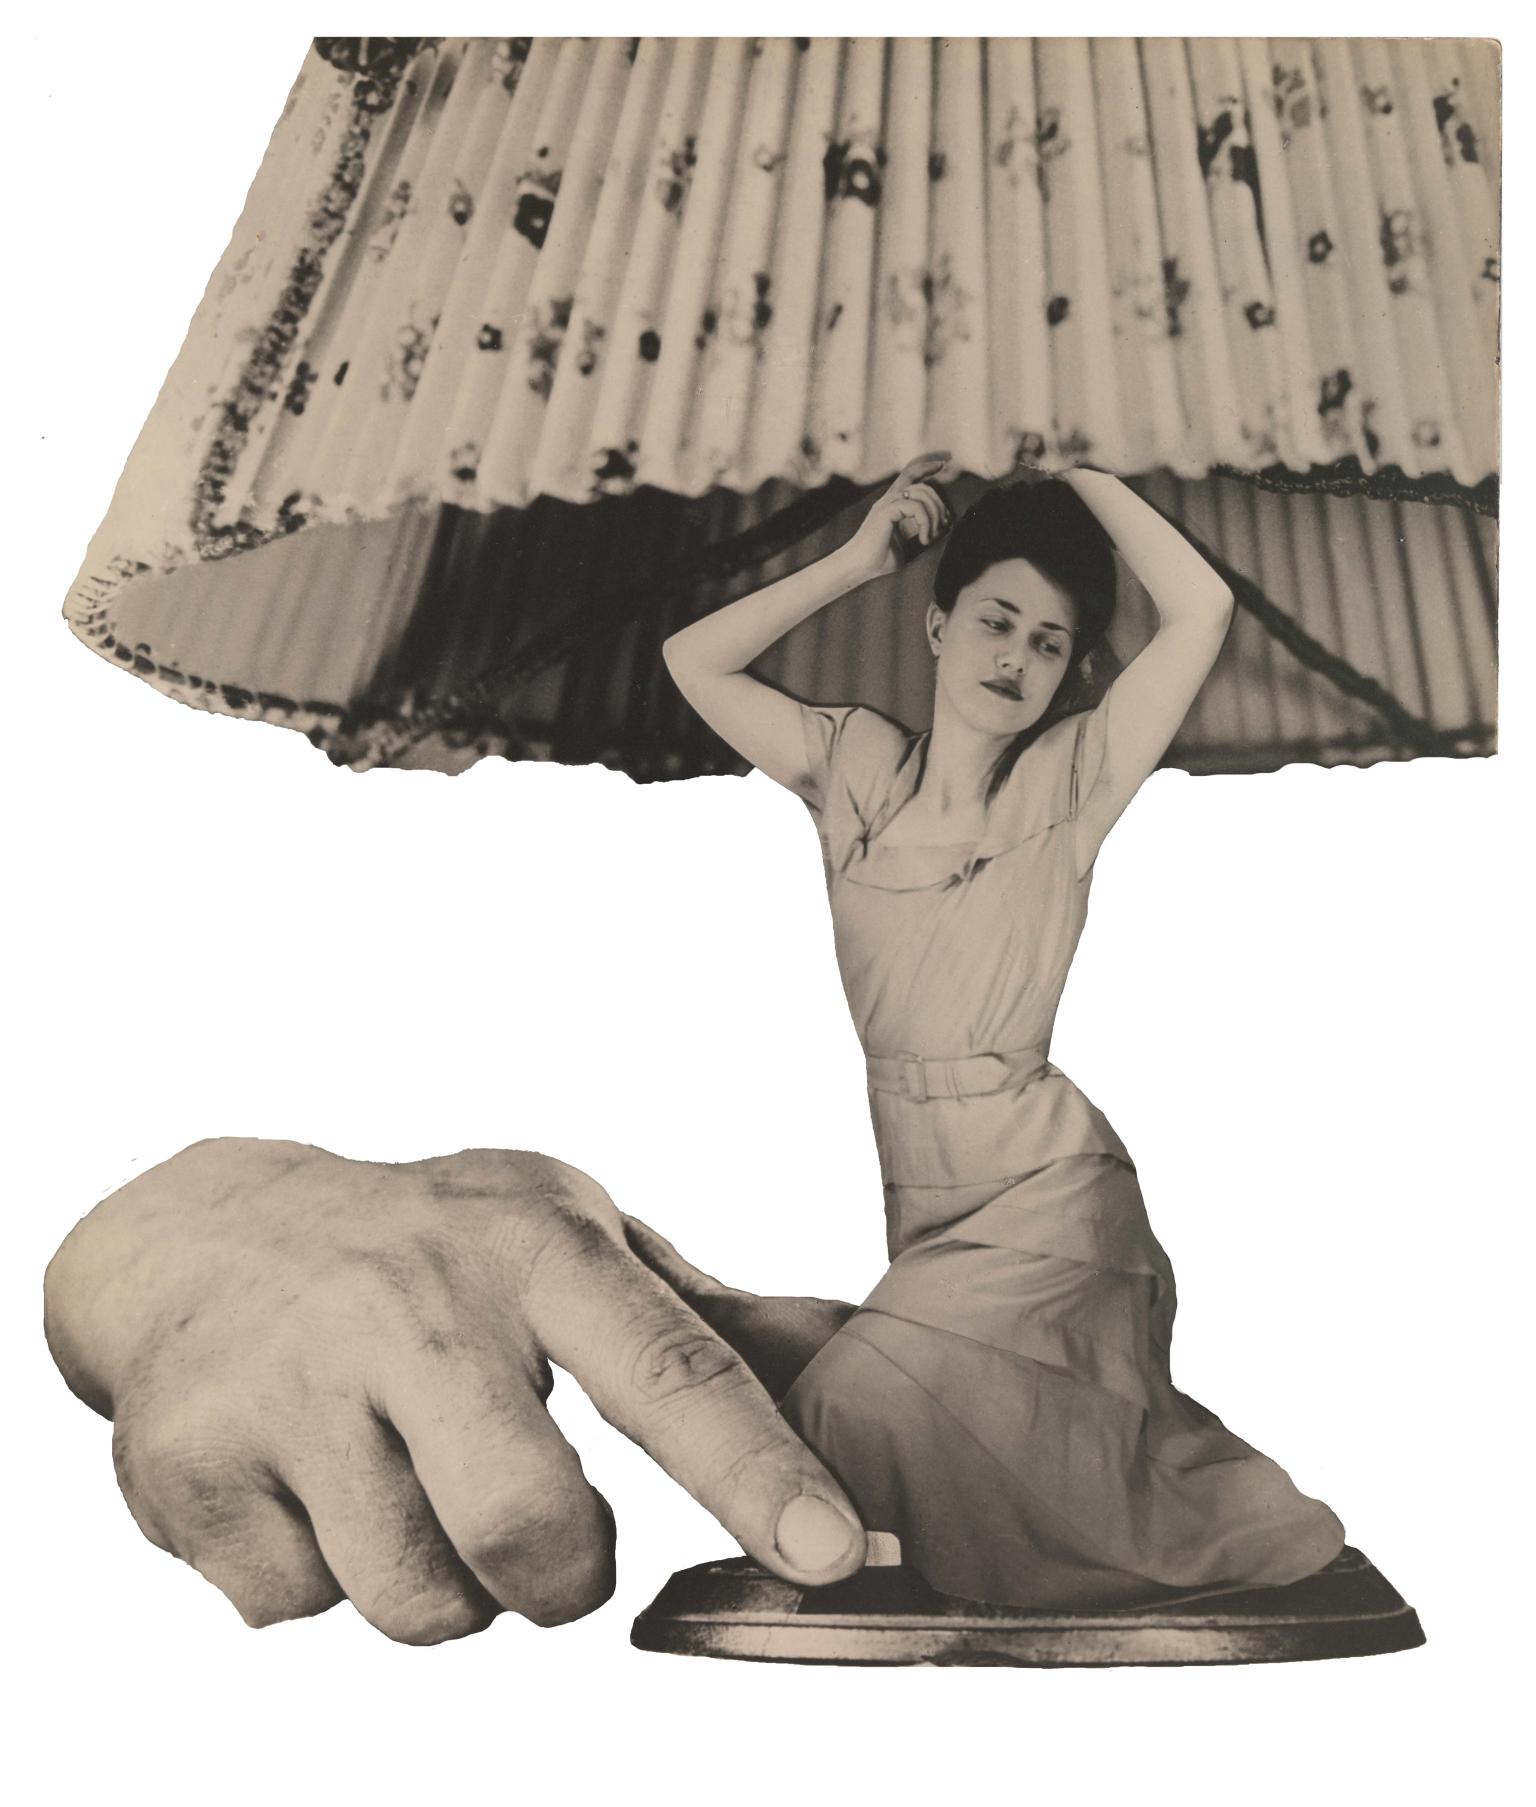 Photomontage featuring male hand grabbing the base of a lamp. The lamp base is a woman wearing a dress.